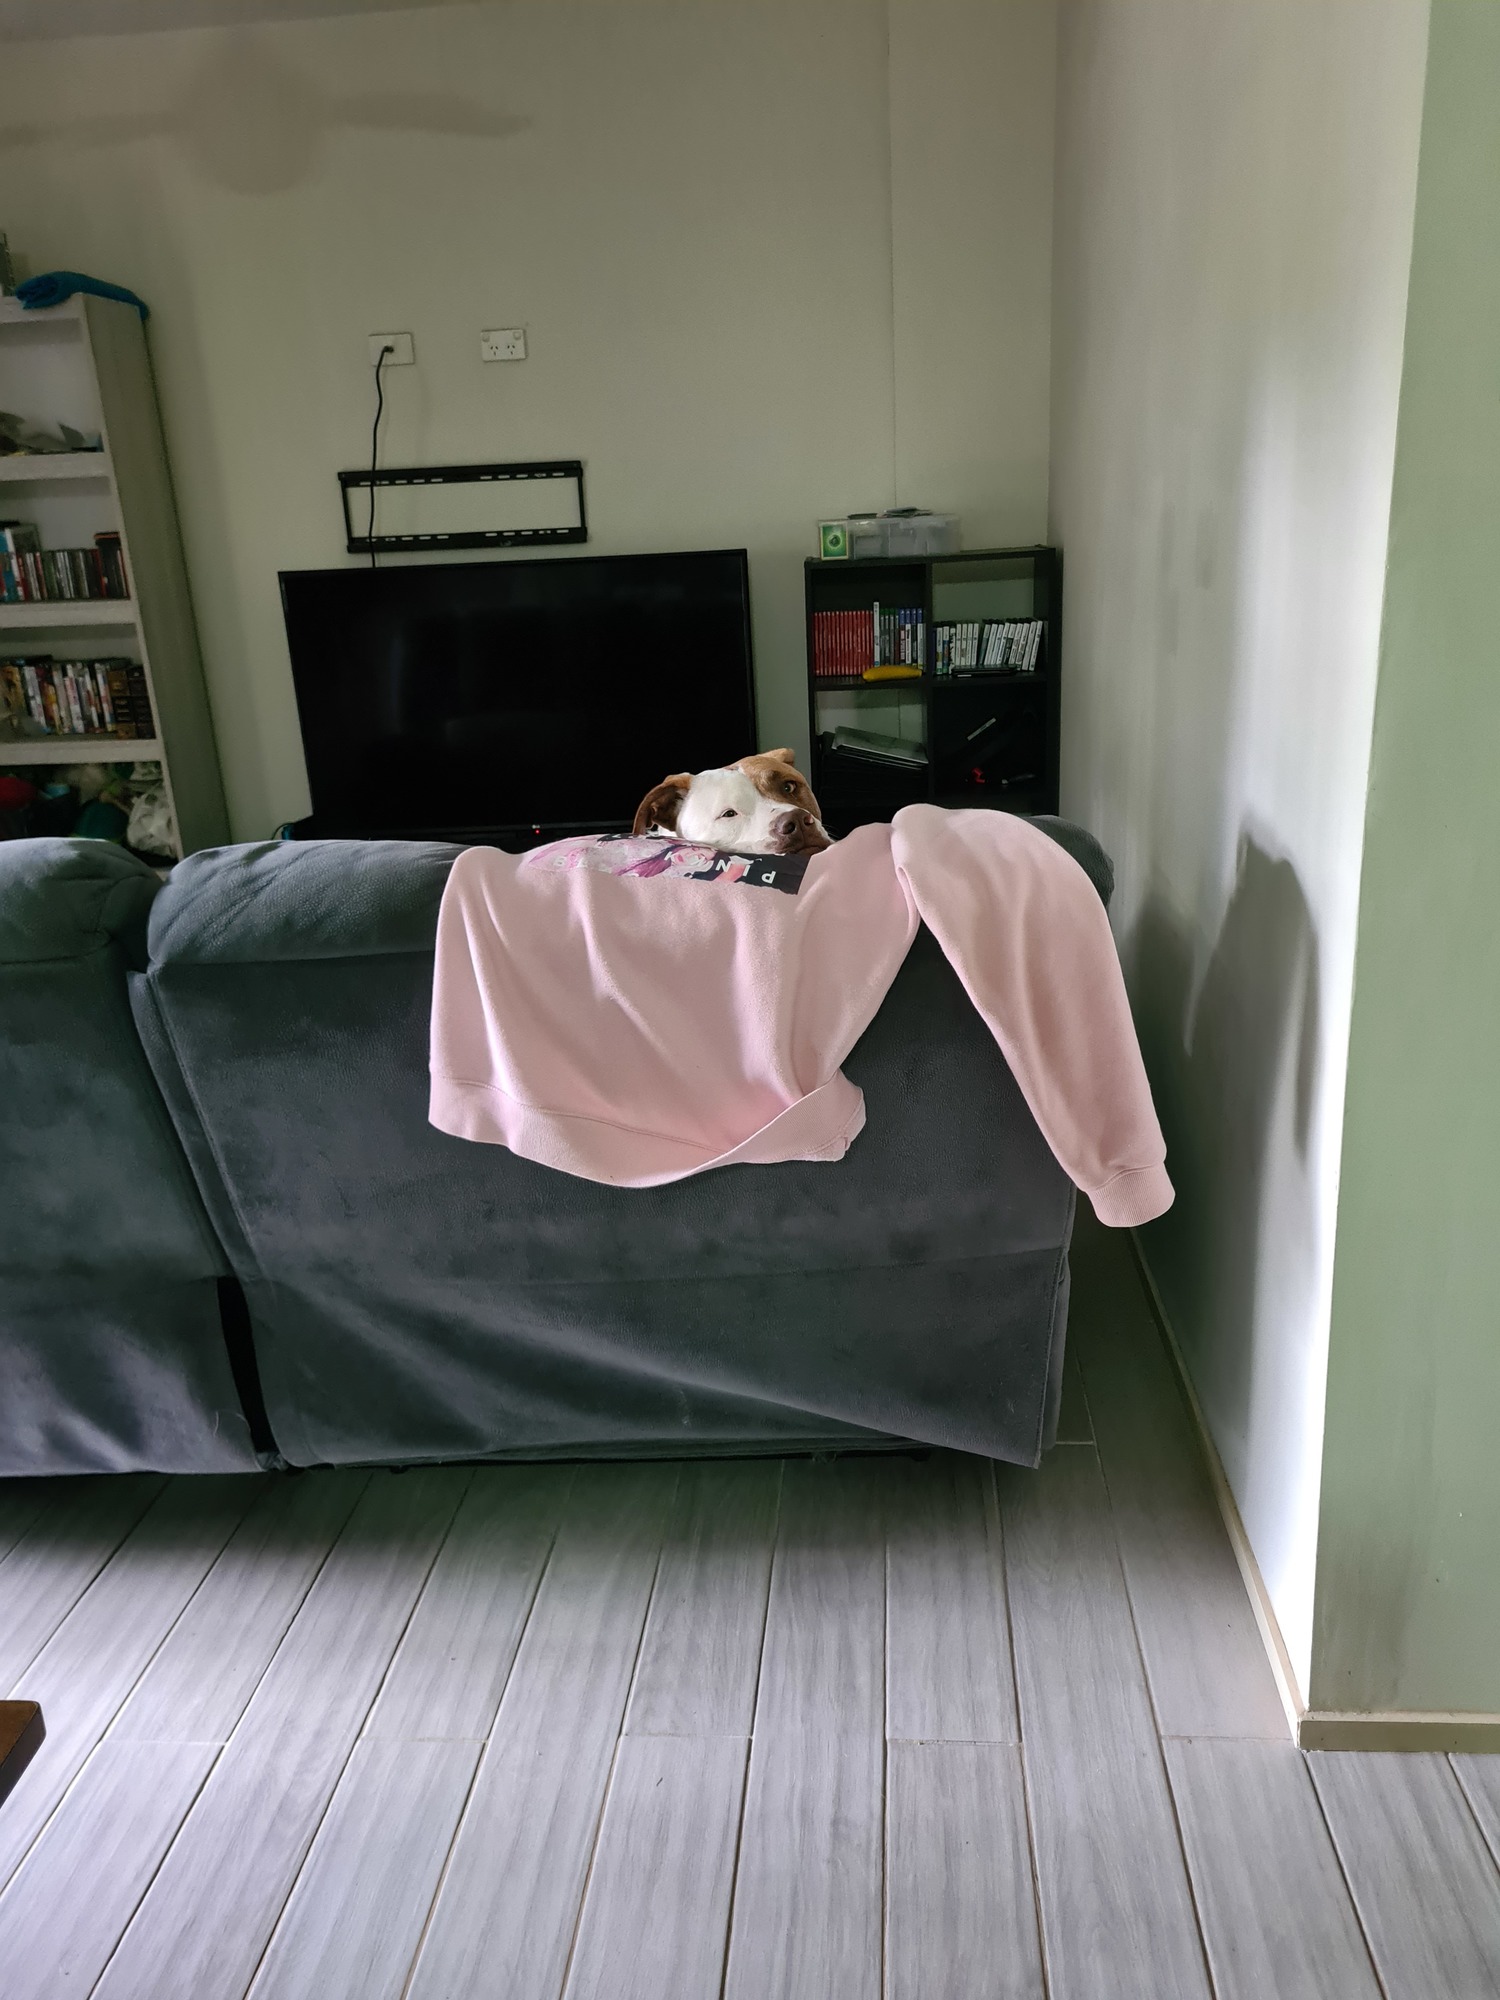 A brown and white Mastiff pokes his nose out behind a couch